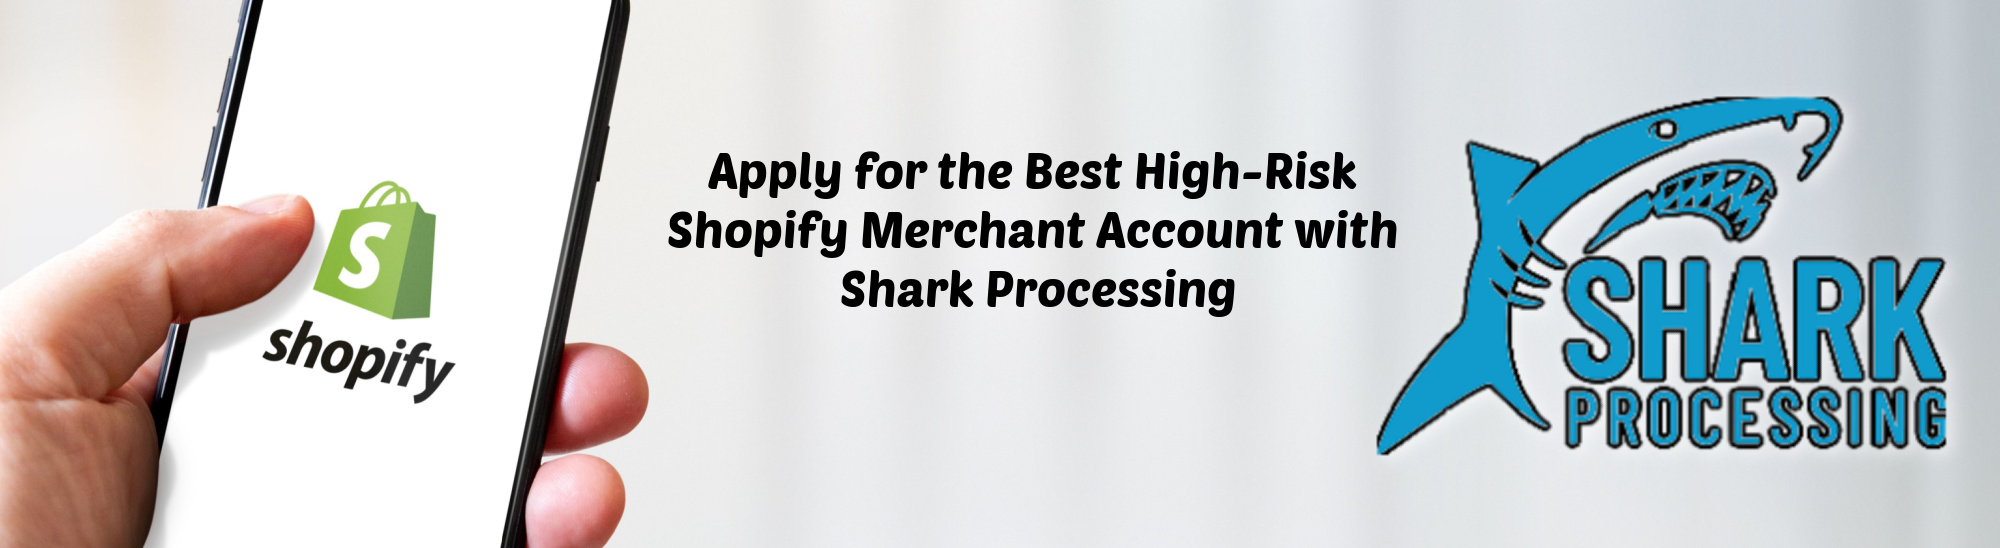 image of apply for best high risk shopify merchant account